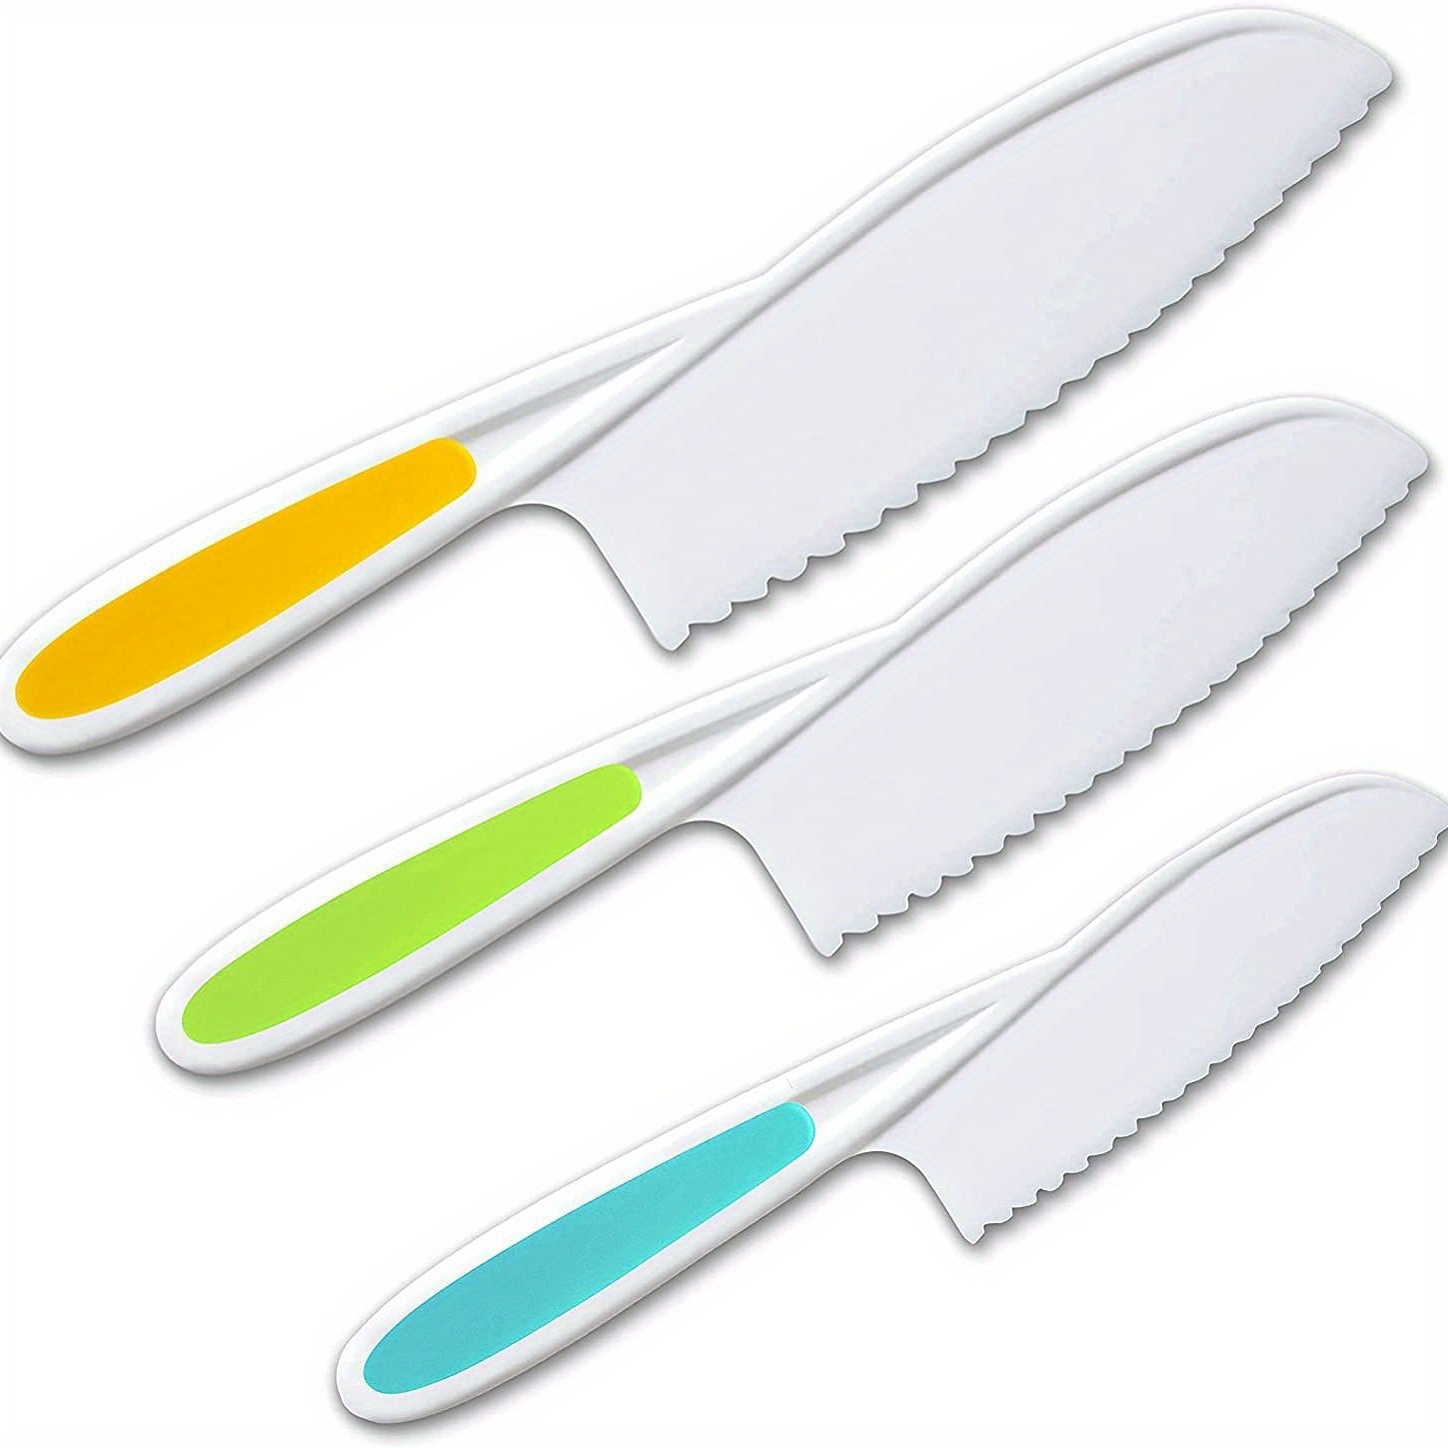  Zlemma Kids Chef Knife Set for Real Cooking with Safe Finger  Guard, Stainless Steel Blade & PP Handle,Perfect for Training Cutting  Montessori Kitchen Tool, Kid-Friendly BPA Free (Yellow): Home & Kitchen